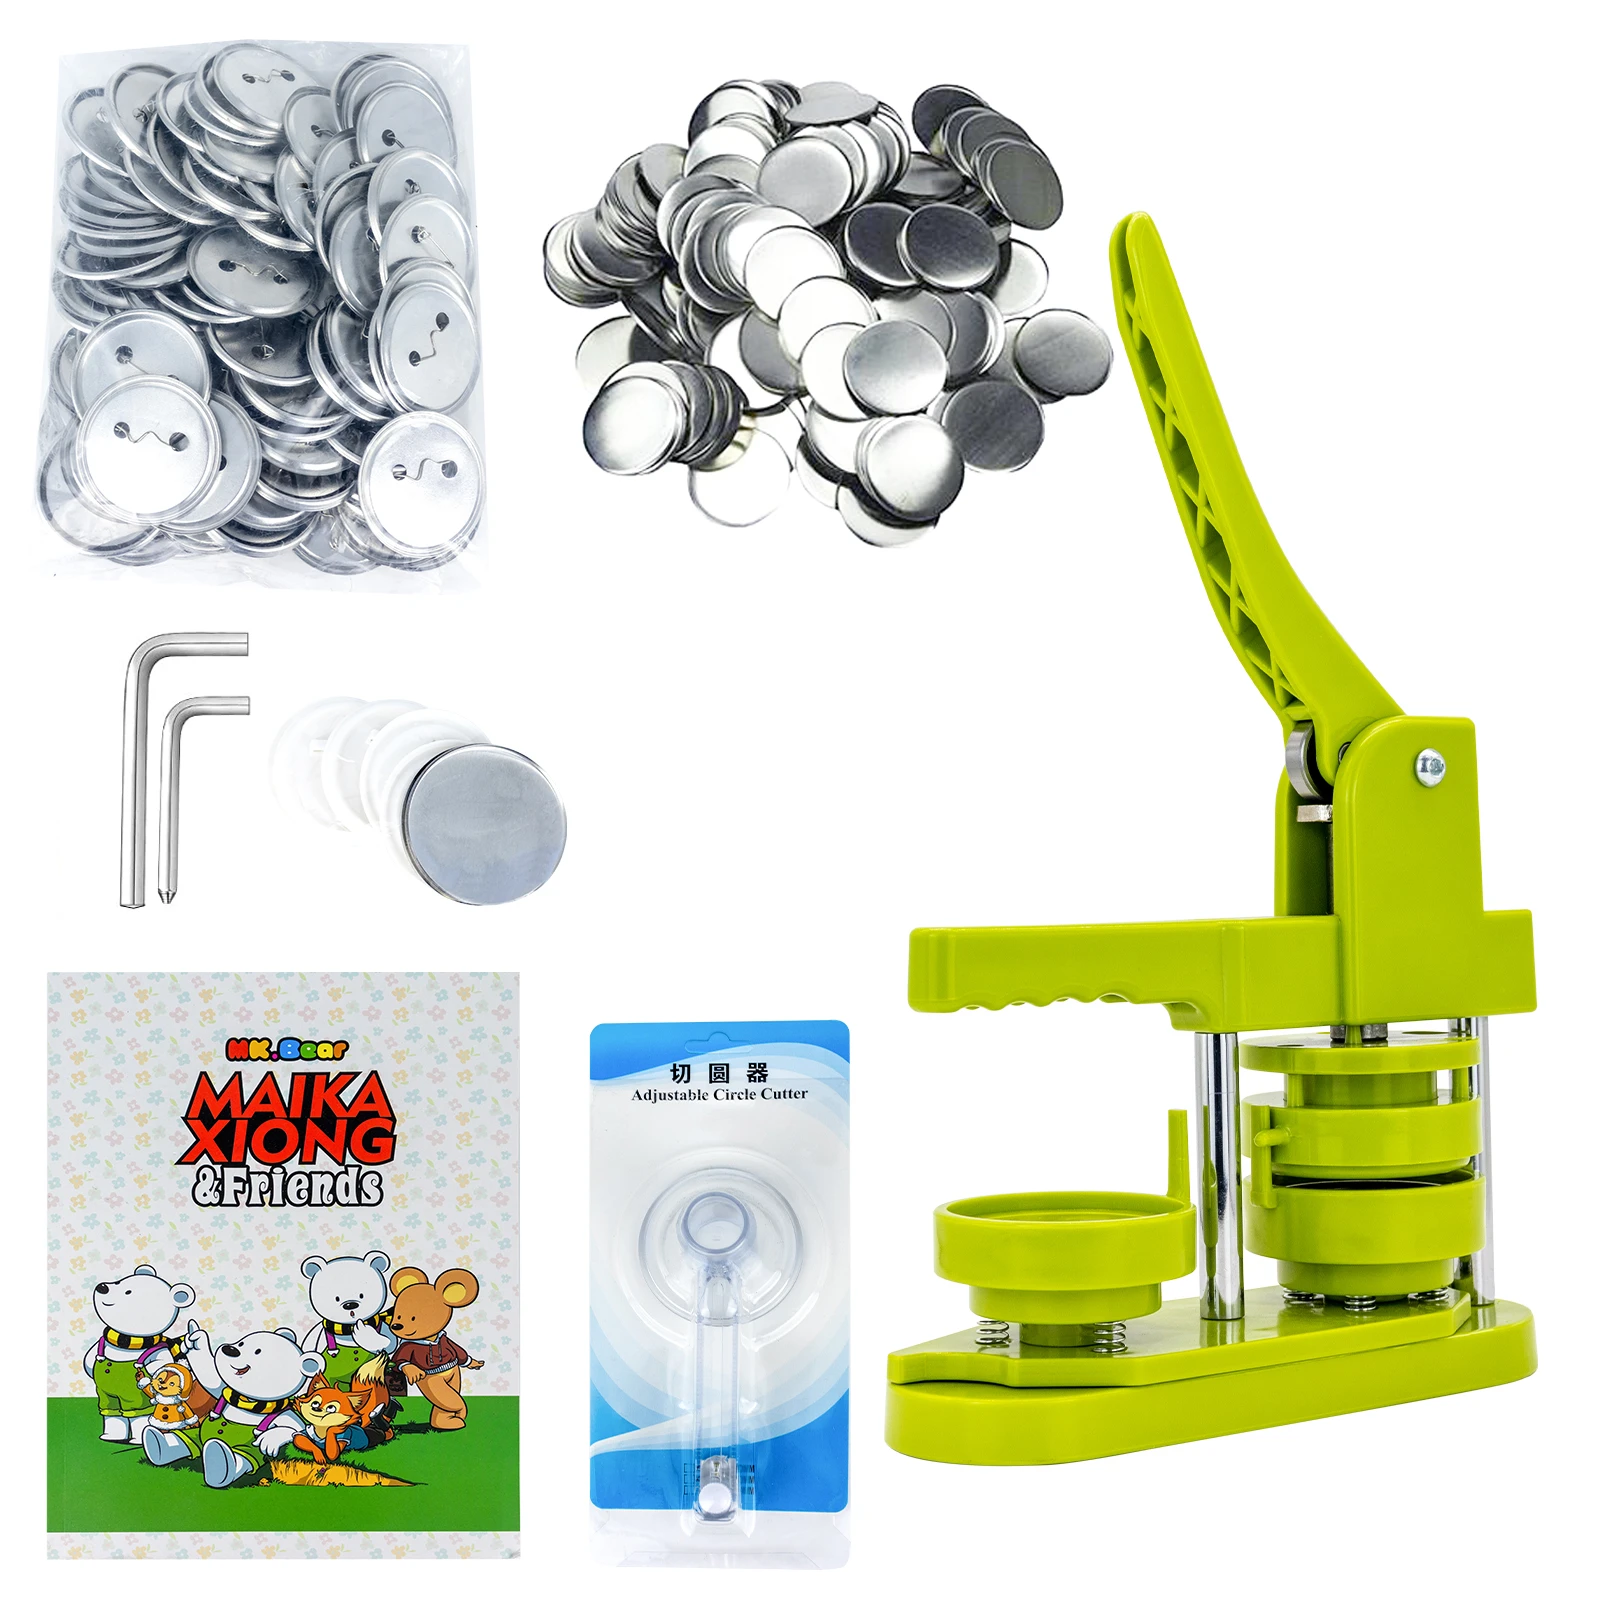 I eat breakfast Pick up leaves tense Rotate Pin Badge Maker Machine Button Pin Maker Badge Punch Press Machine  With 100pcs Metal Button Parts And Cutter - Button & Badge Makers -  AliExpress